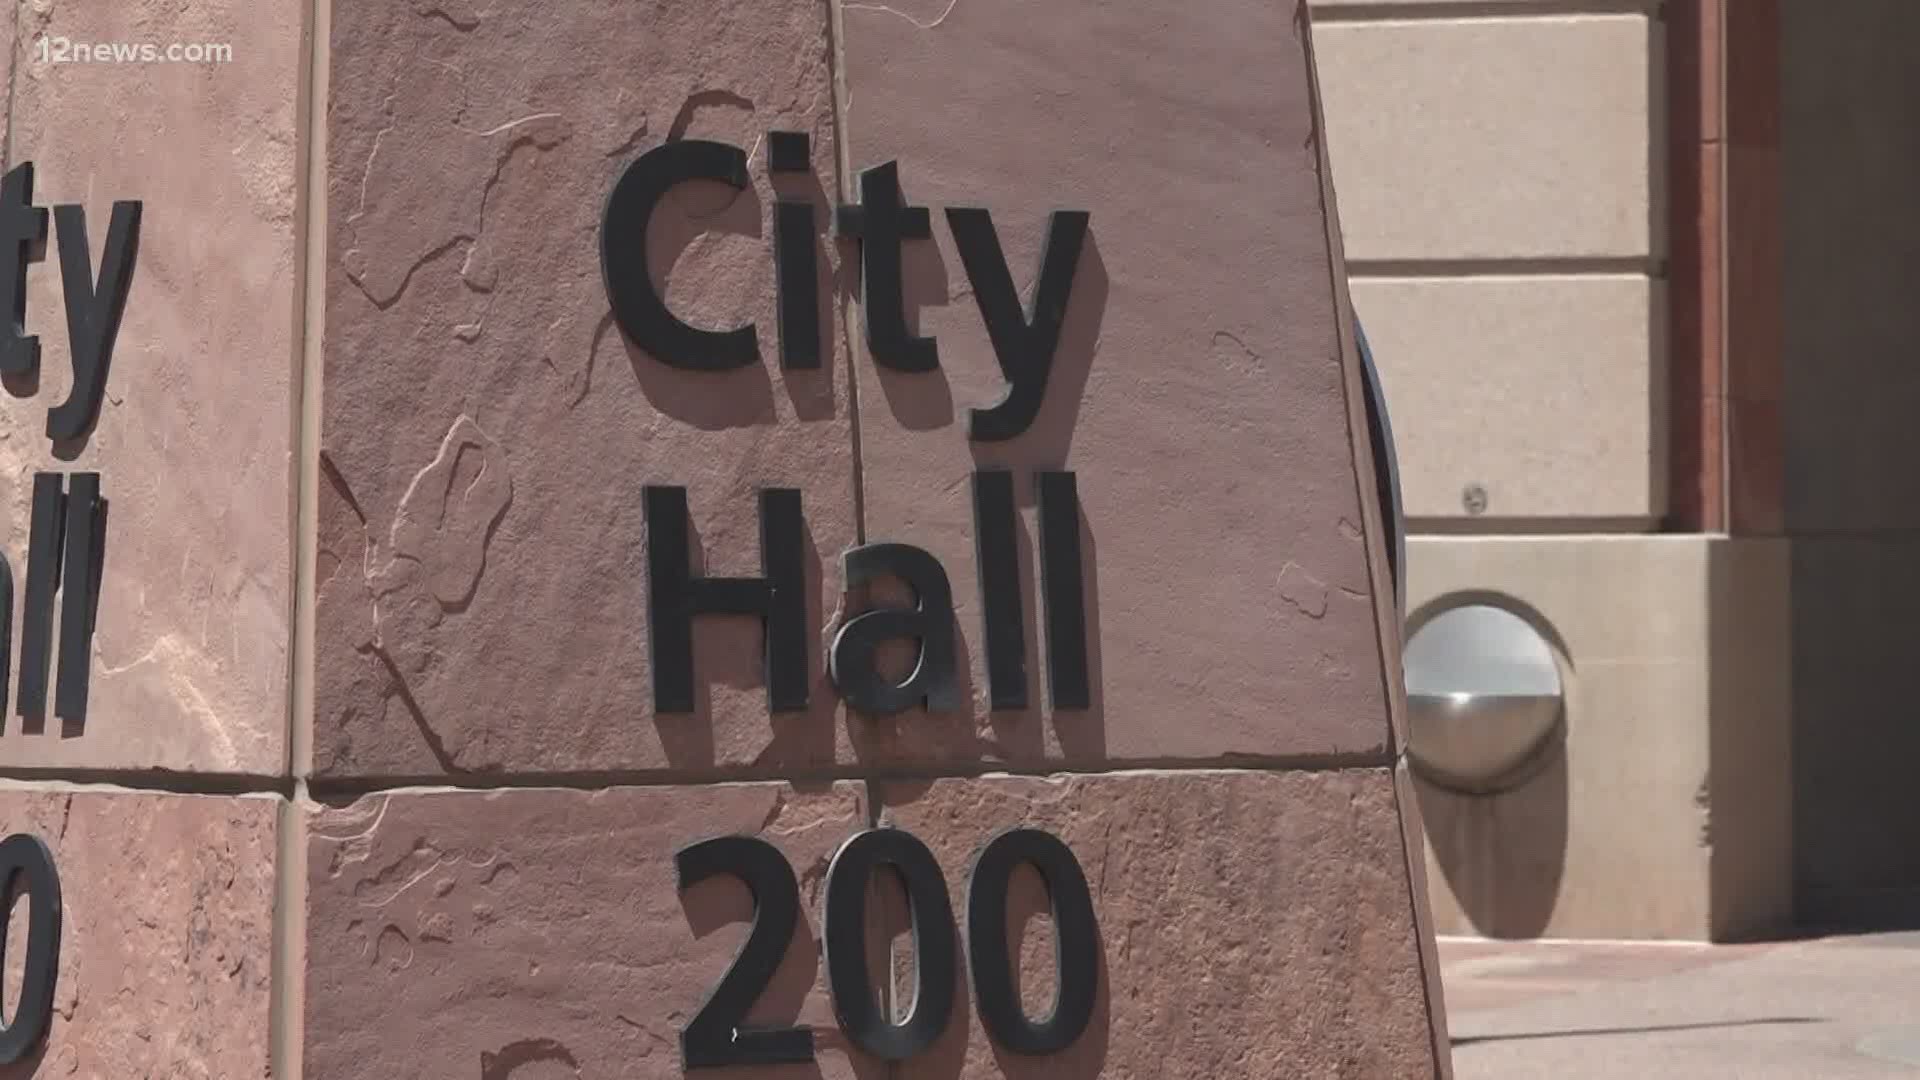 After demands from the community, the Phoenix City Council has approved funding for a civilian police review board. Funding comes from leftover COVID-19 funds.